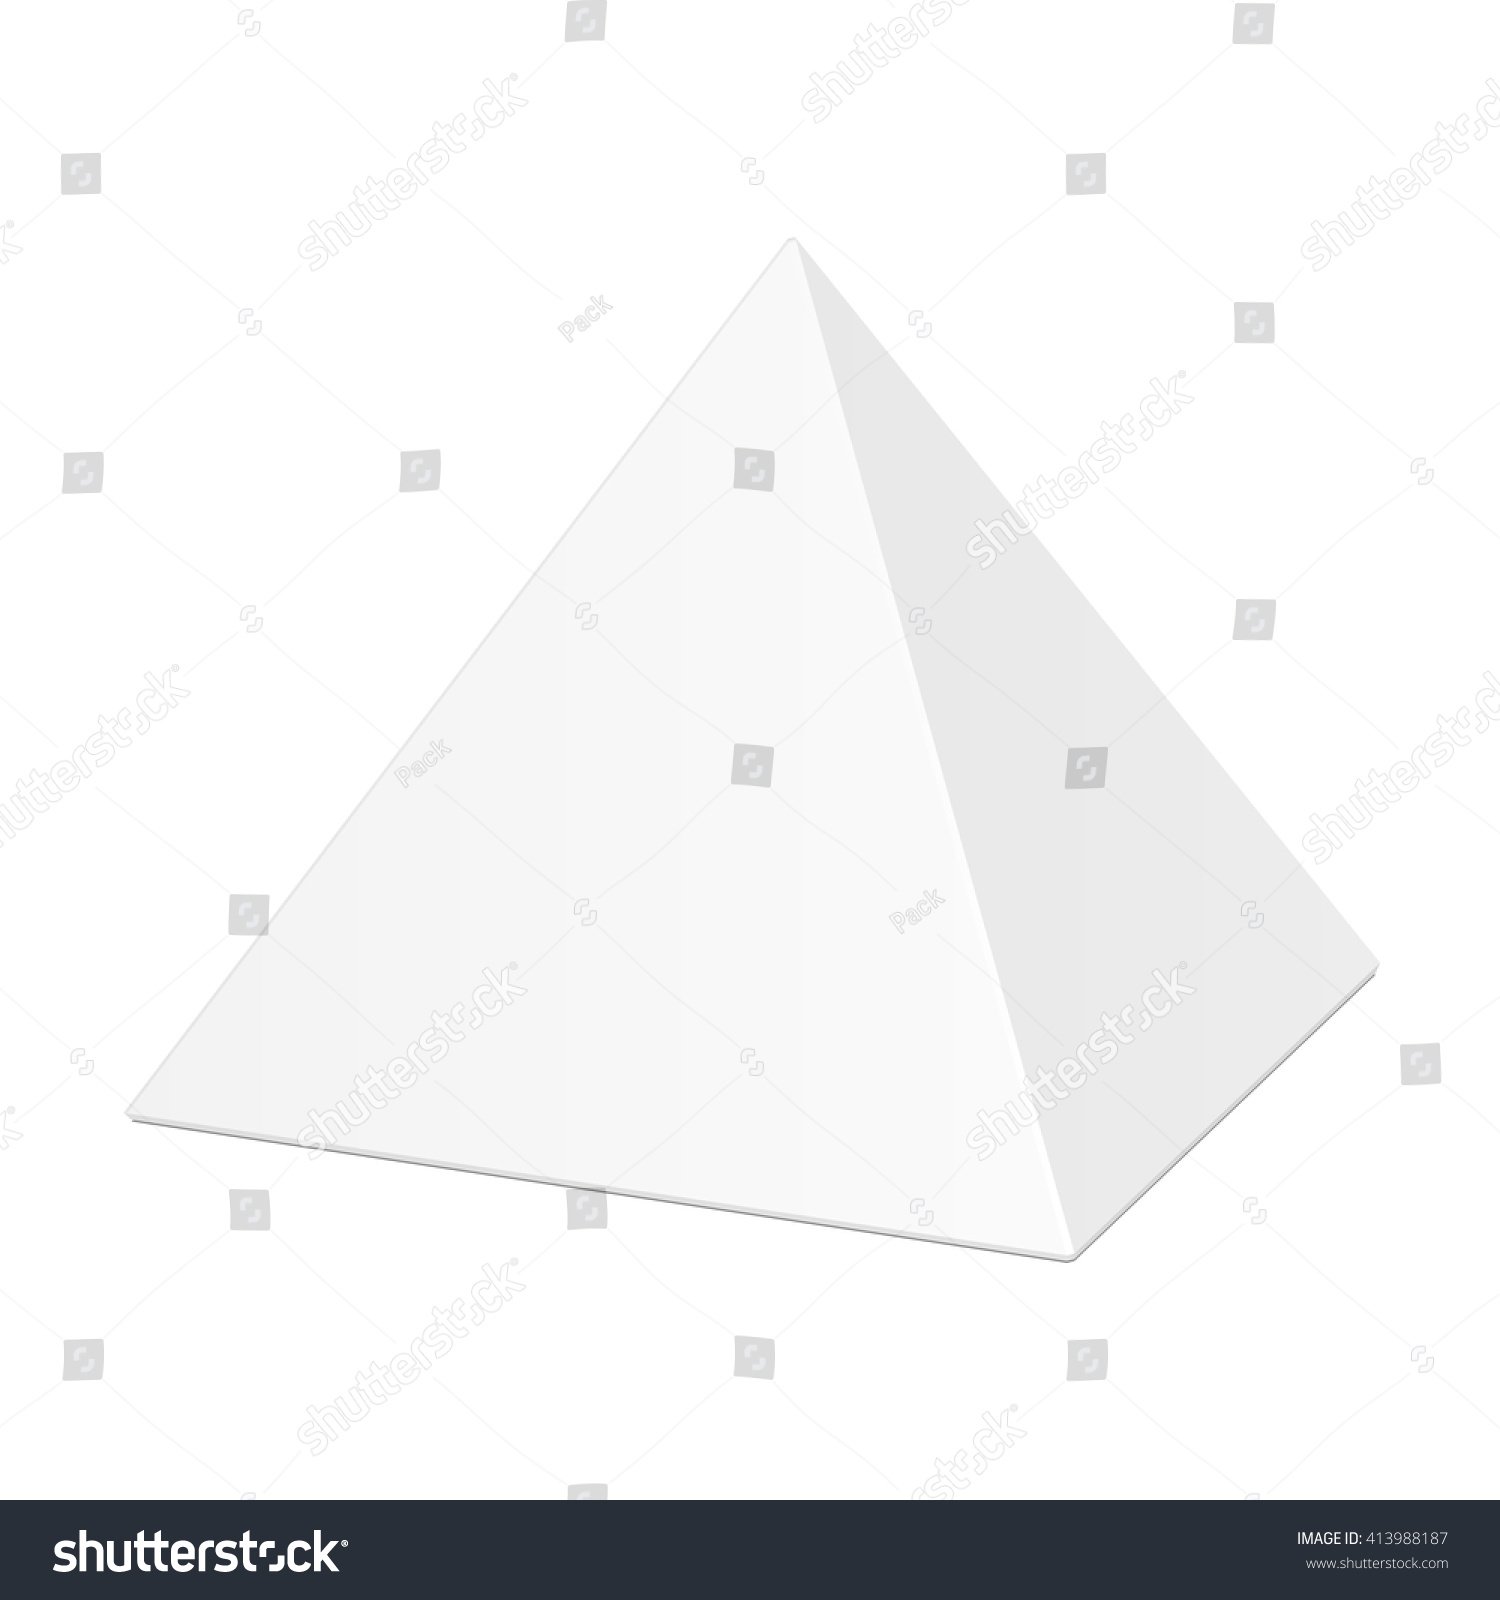 Download White Cardboard Pyramid Triangle Box Packaging Stock Vector 413988187 - Shutterstock